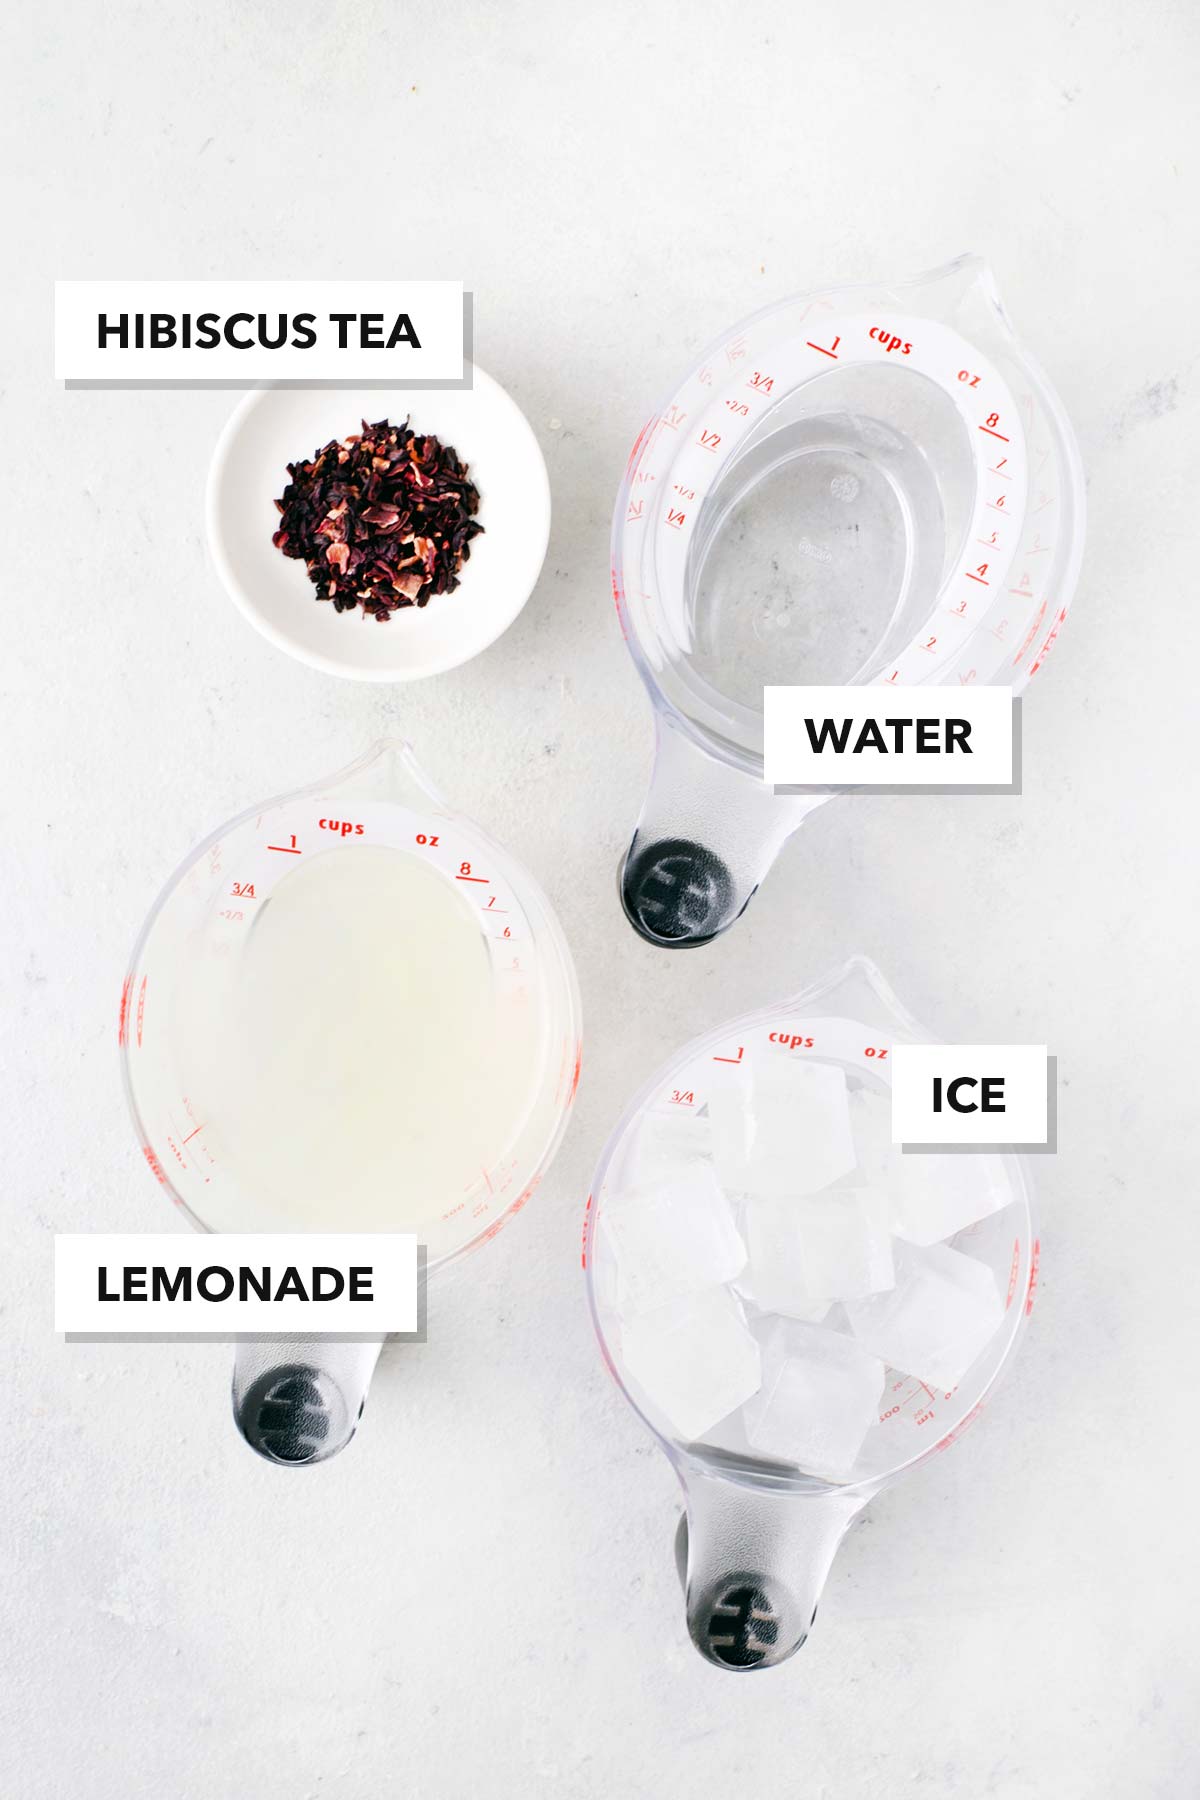 Hibiscus Lemonade ingredients measured in cups and labeled on a table.